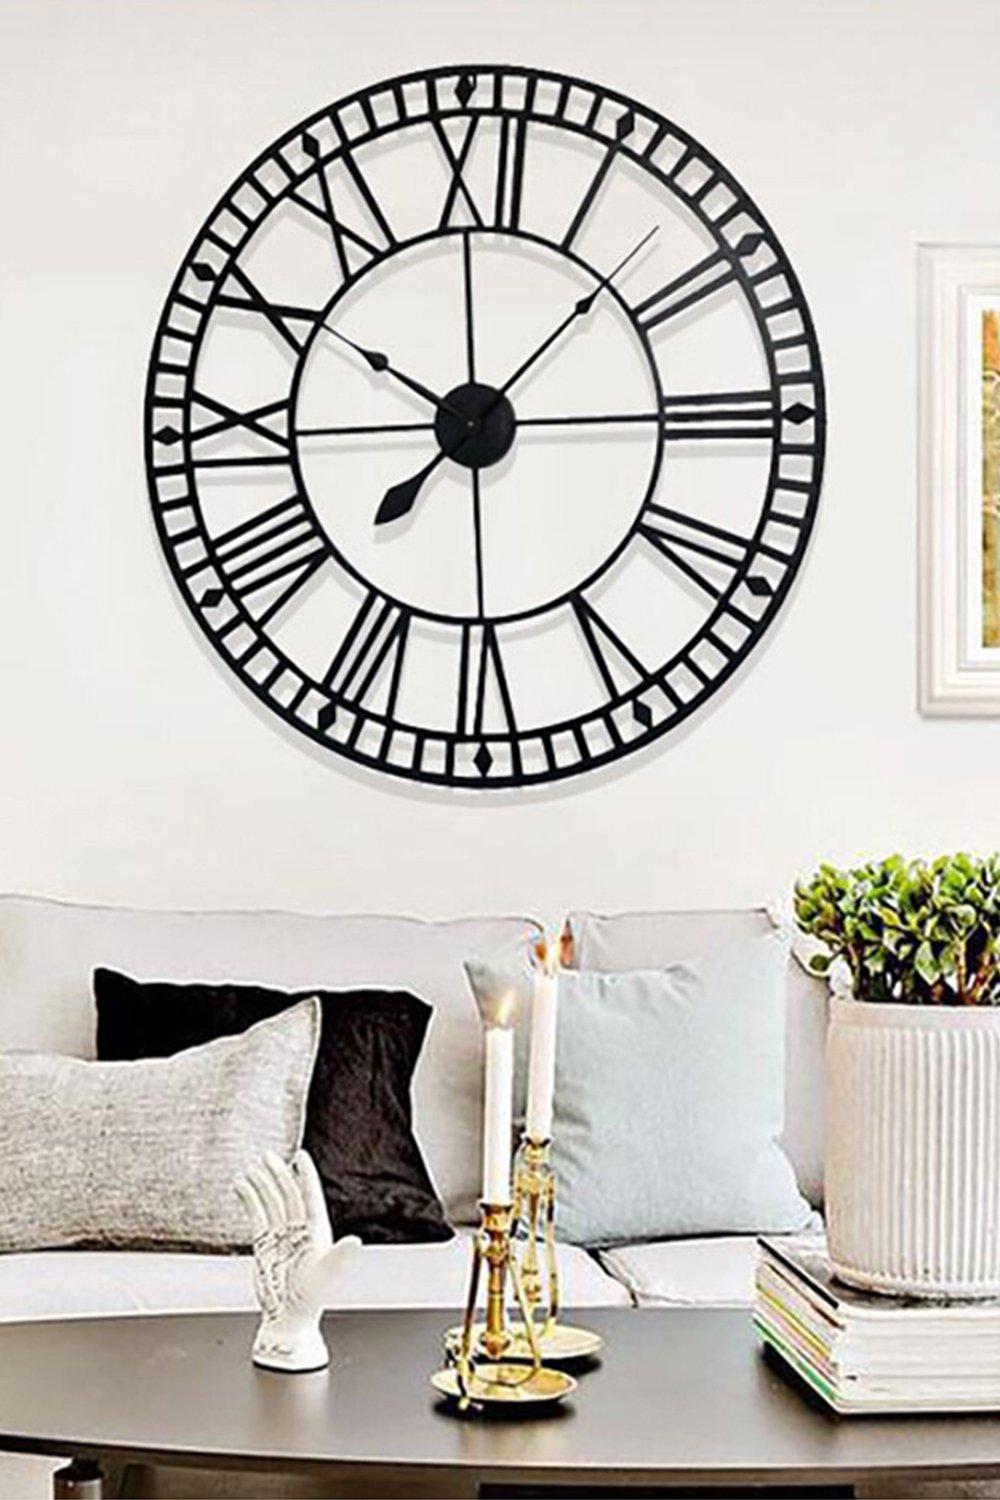 40cm Dia Black Round Roman Numeral Skeleton Wall Clock with Scale